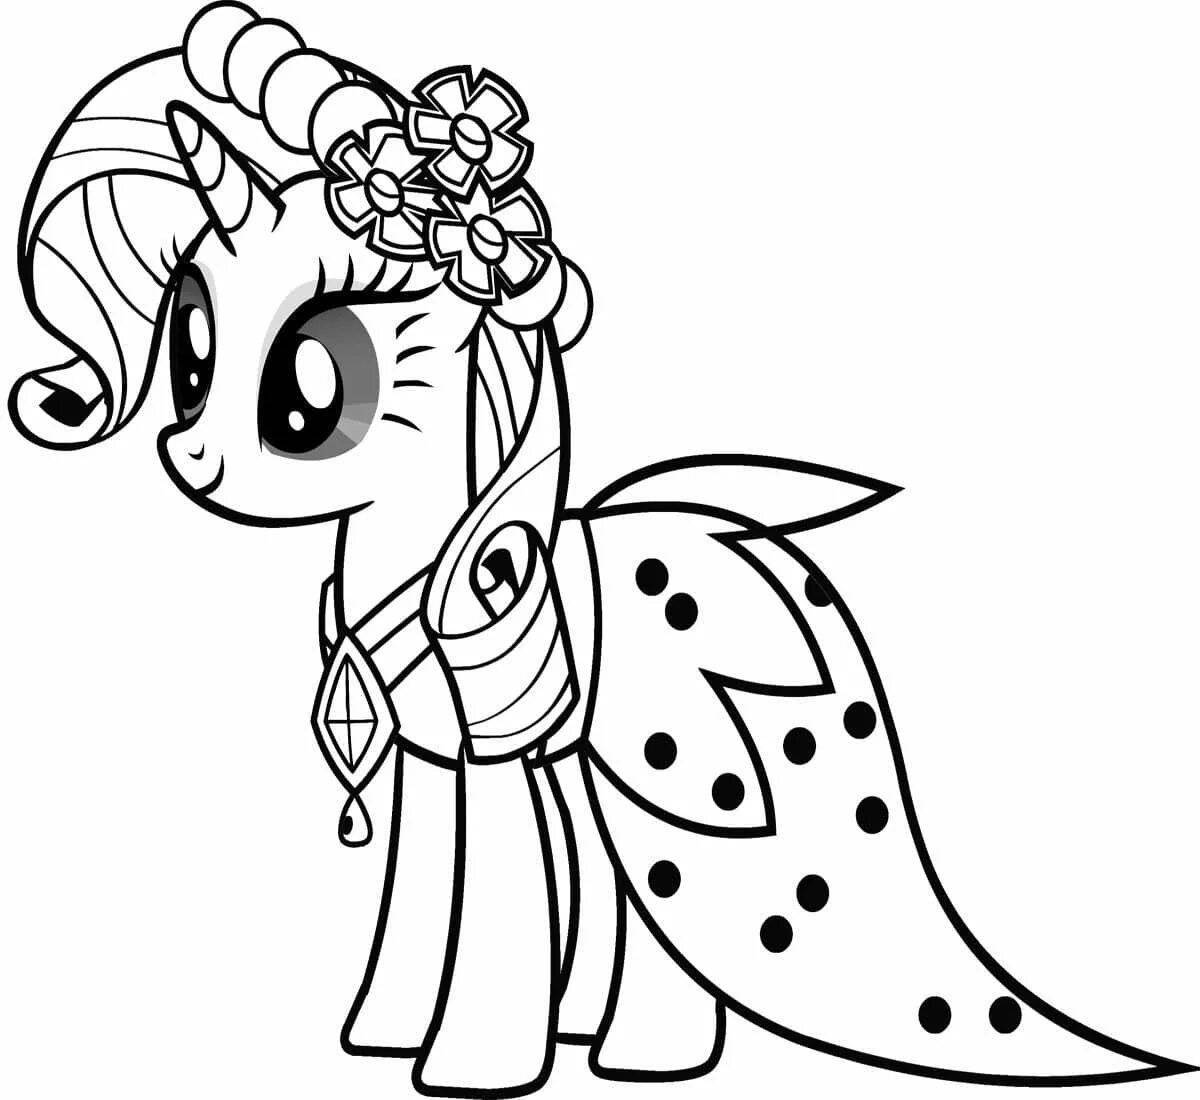 Coloring page wild pony print